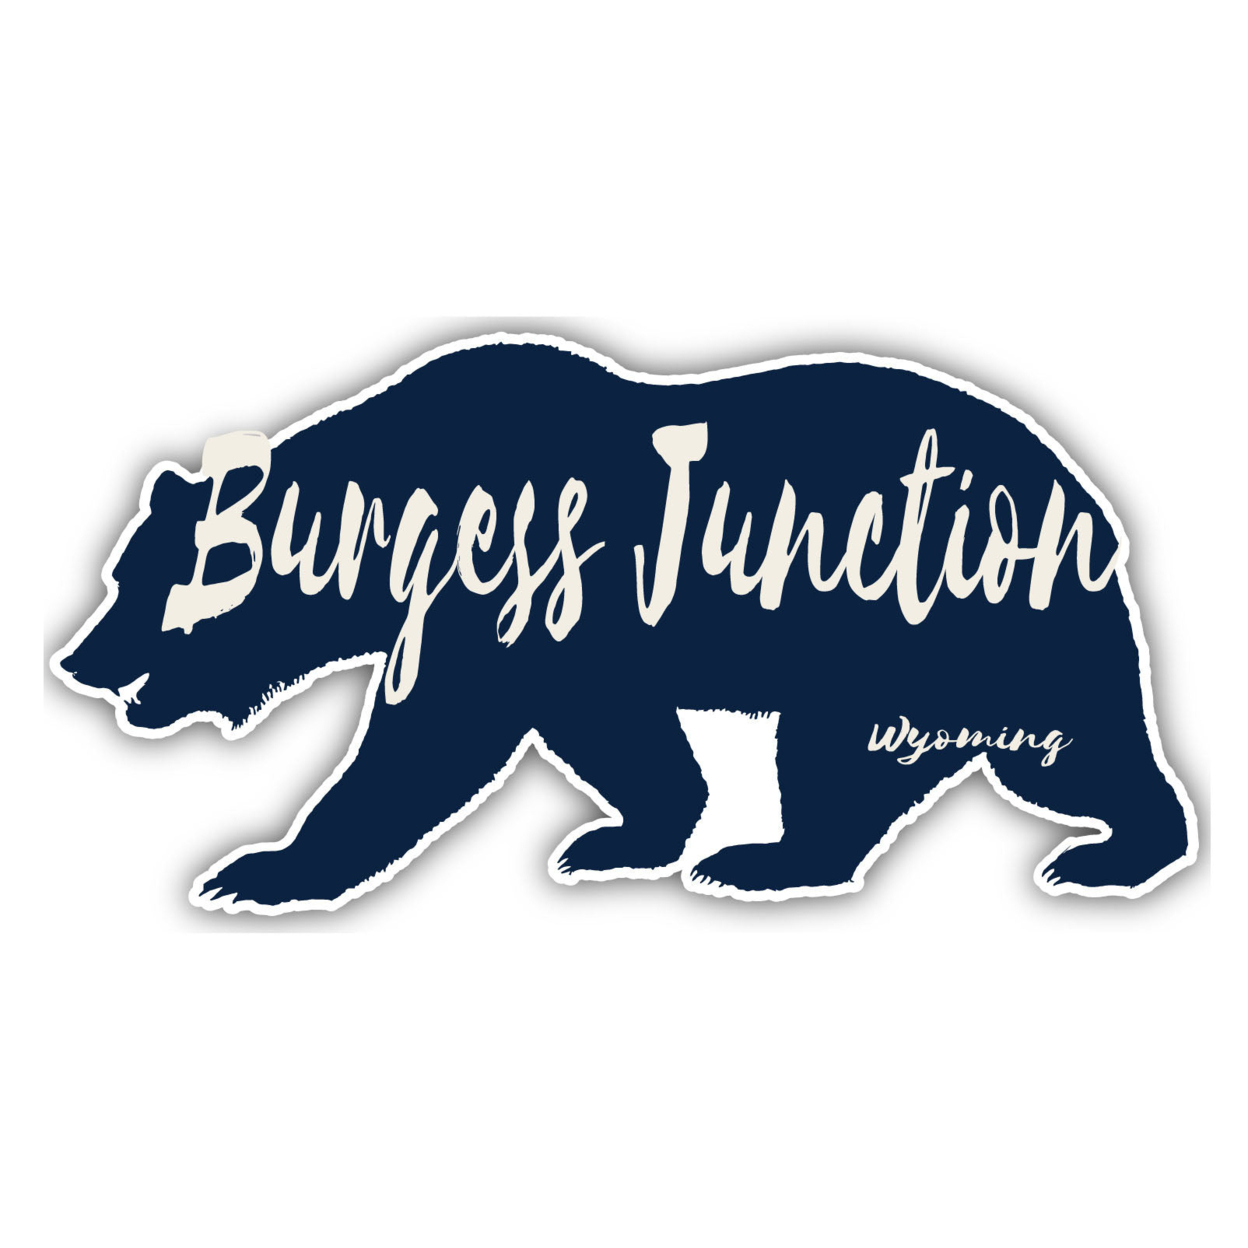 Burgess Junction Wyoming Souvenir Decorative Stickers (Choose Theme And Size) - 4-Pack, 2-Inch, Bear